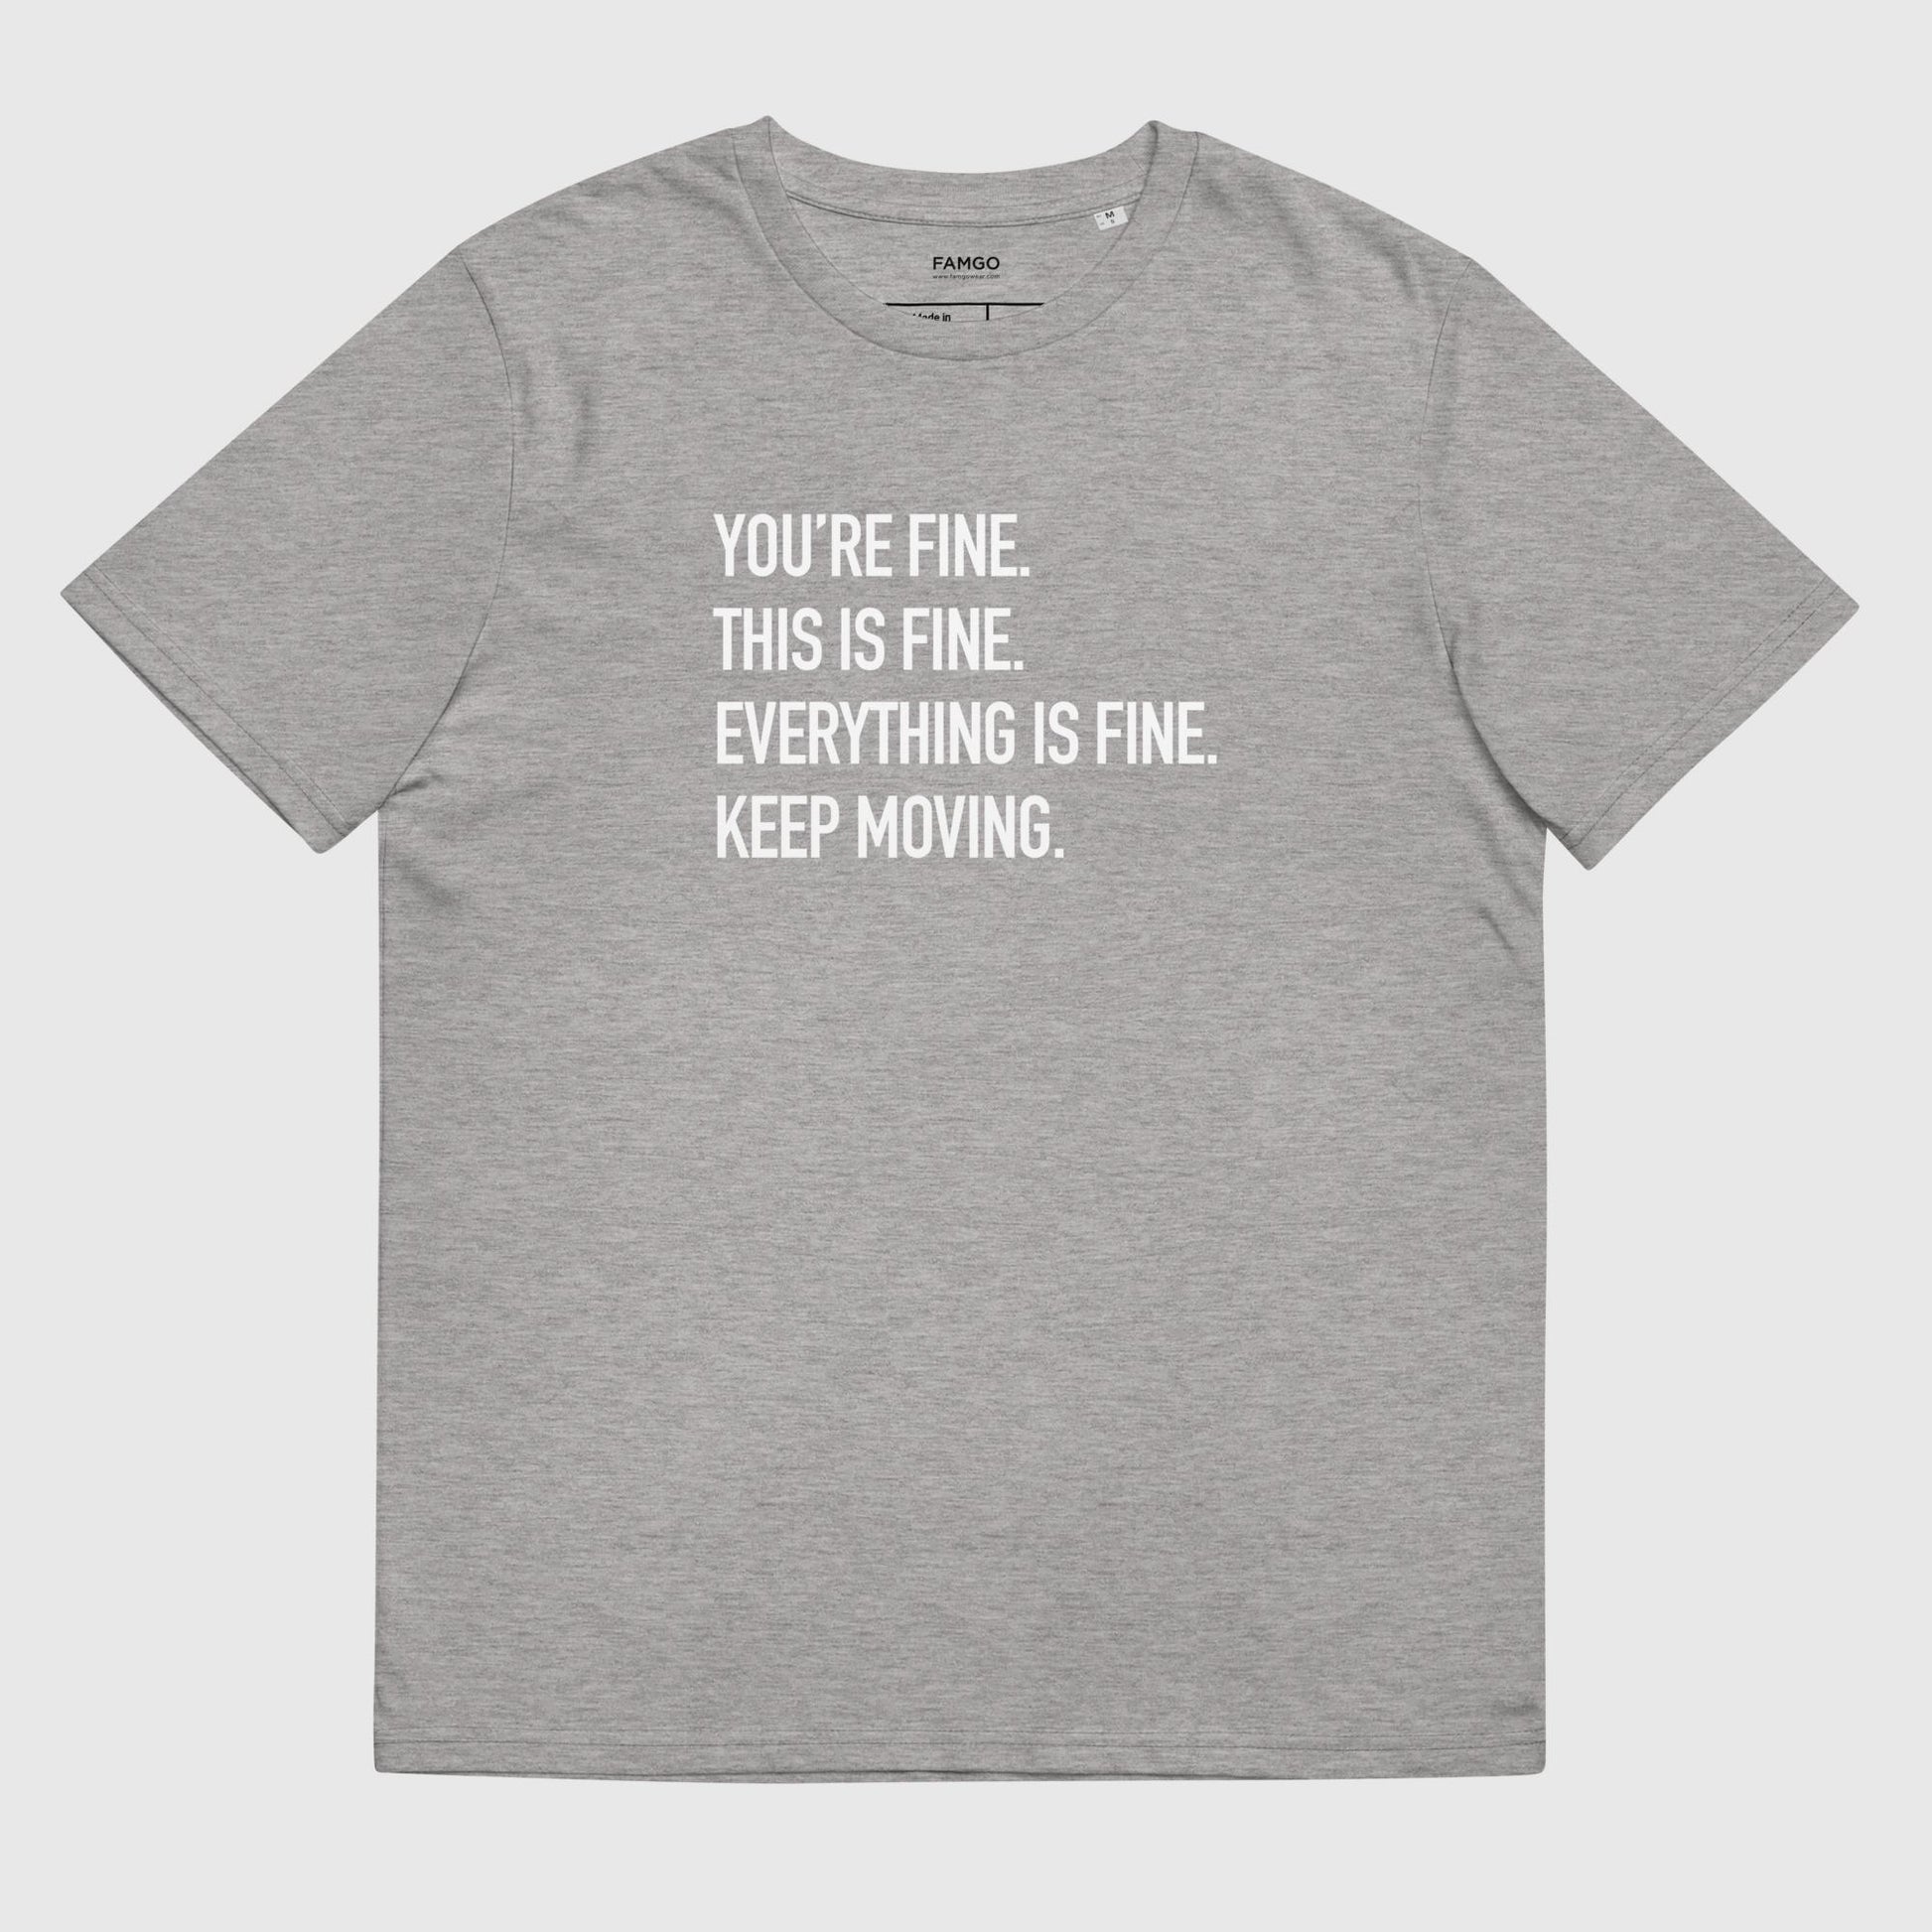 Men's heather gray organic cotton t-shirt that features Courtney Dauwalter's mantra, "You're fine. This is fine. Everything is fine. Keep moving."